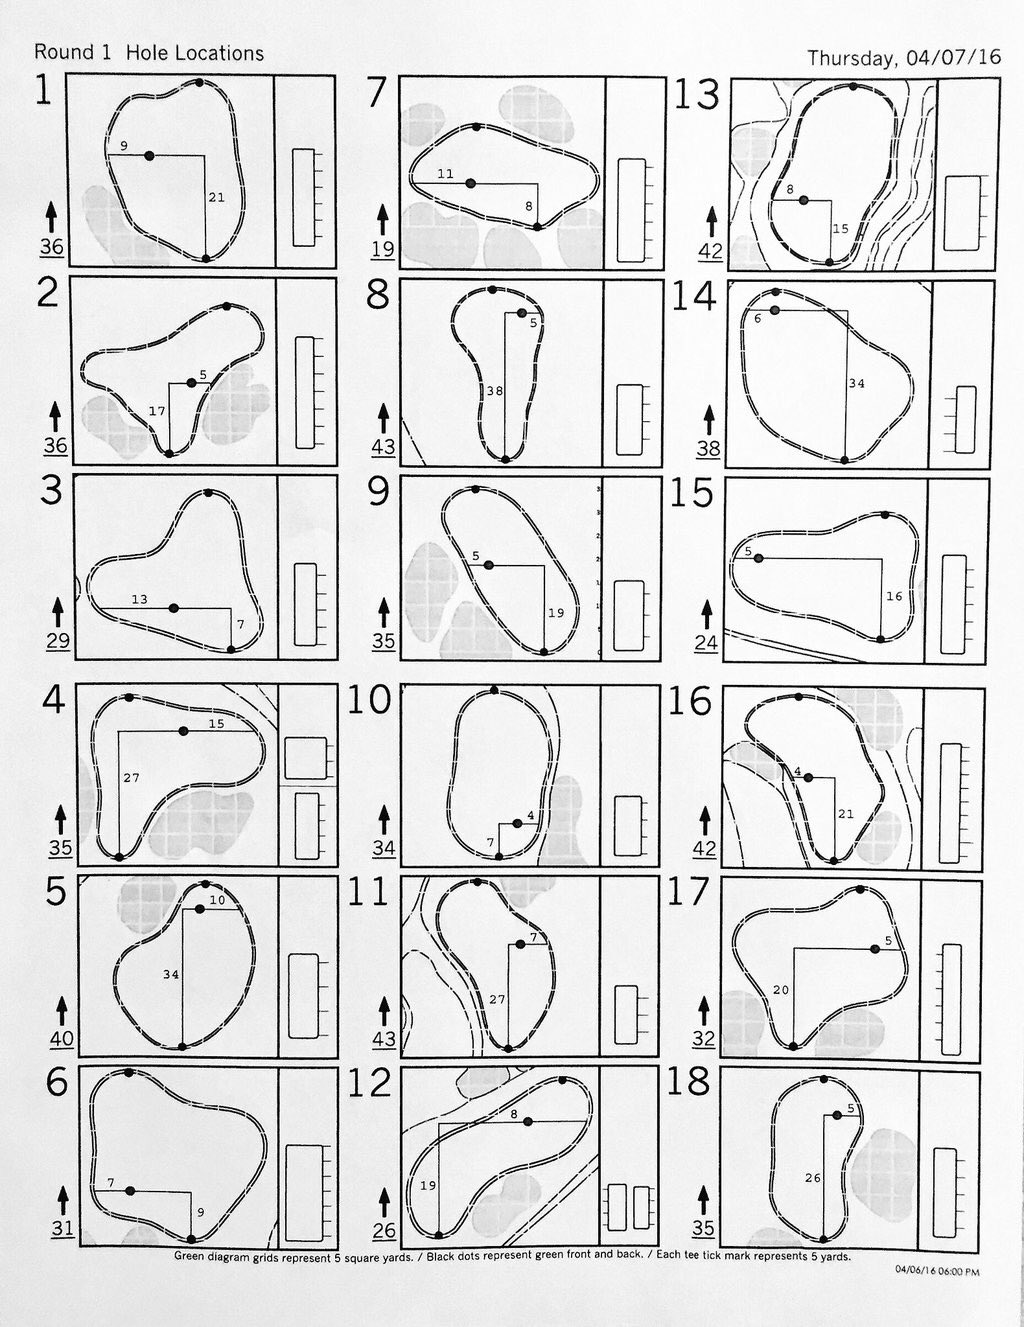 2016-masters-round-1-hole-locations